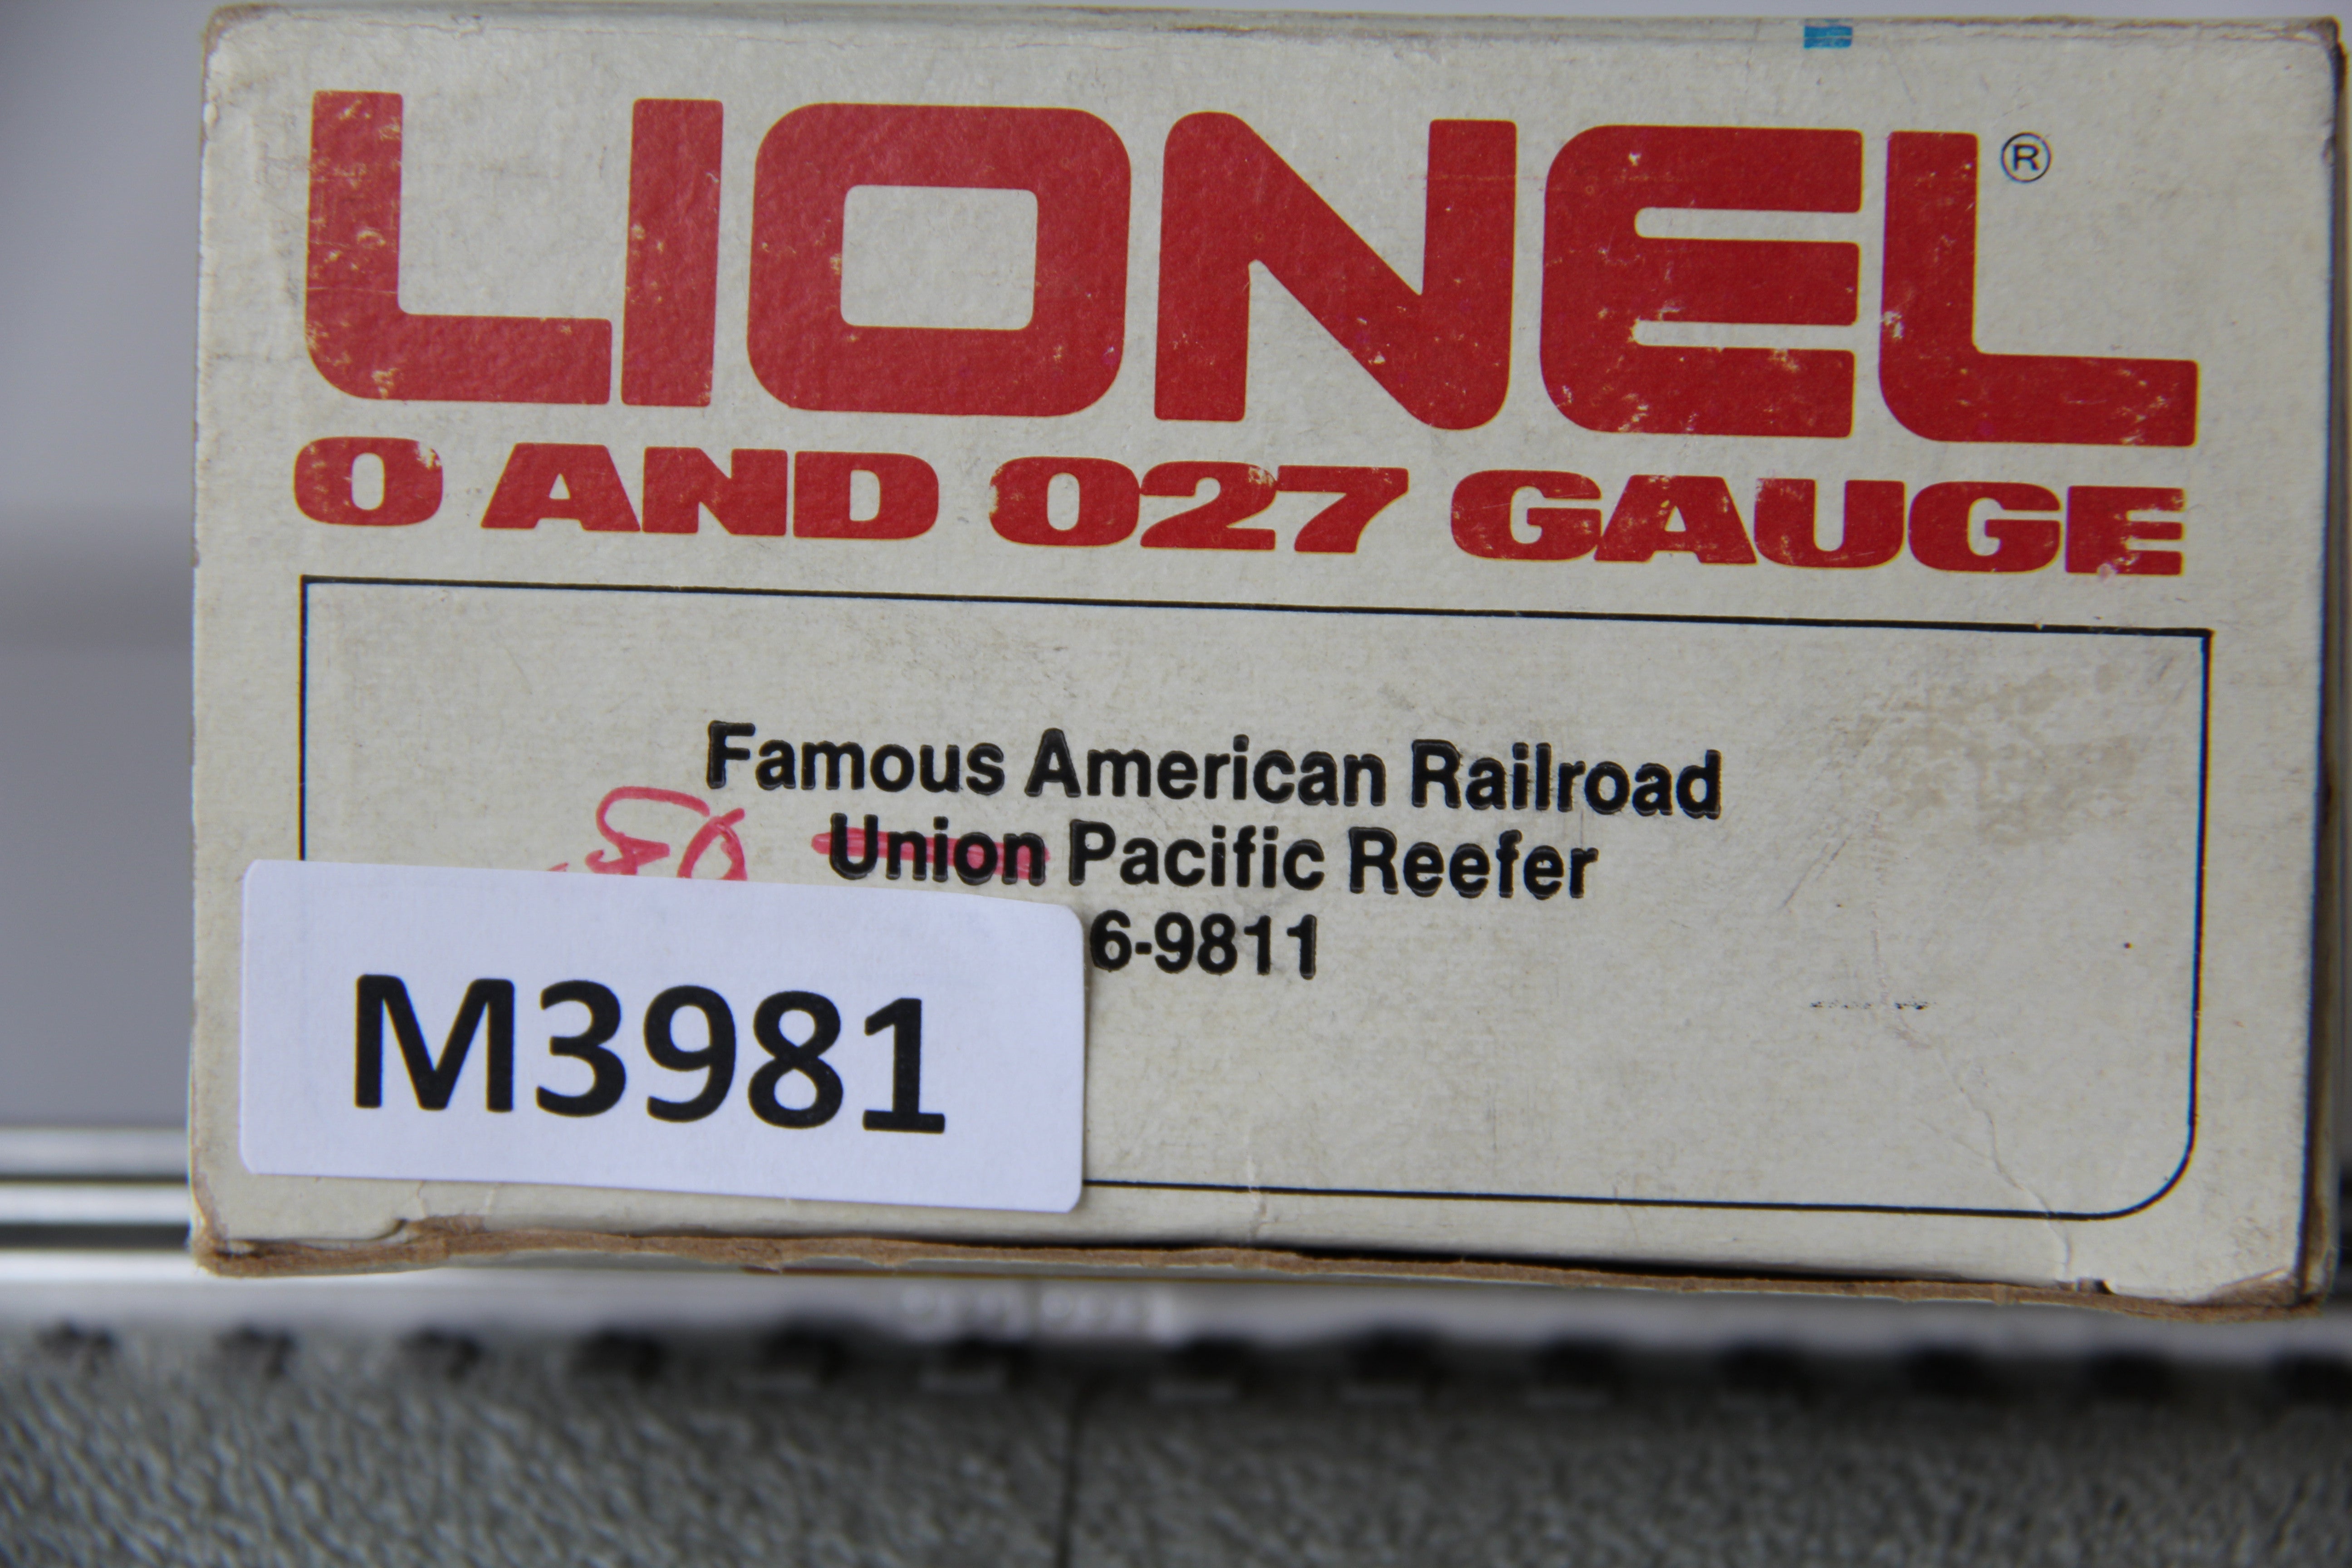 Lionel 6-9811 Famous American Railroad Southern Pacific Reefer-Second hand-M3981